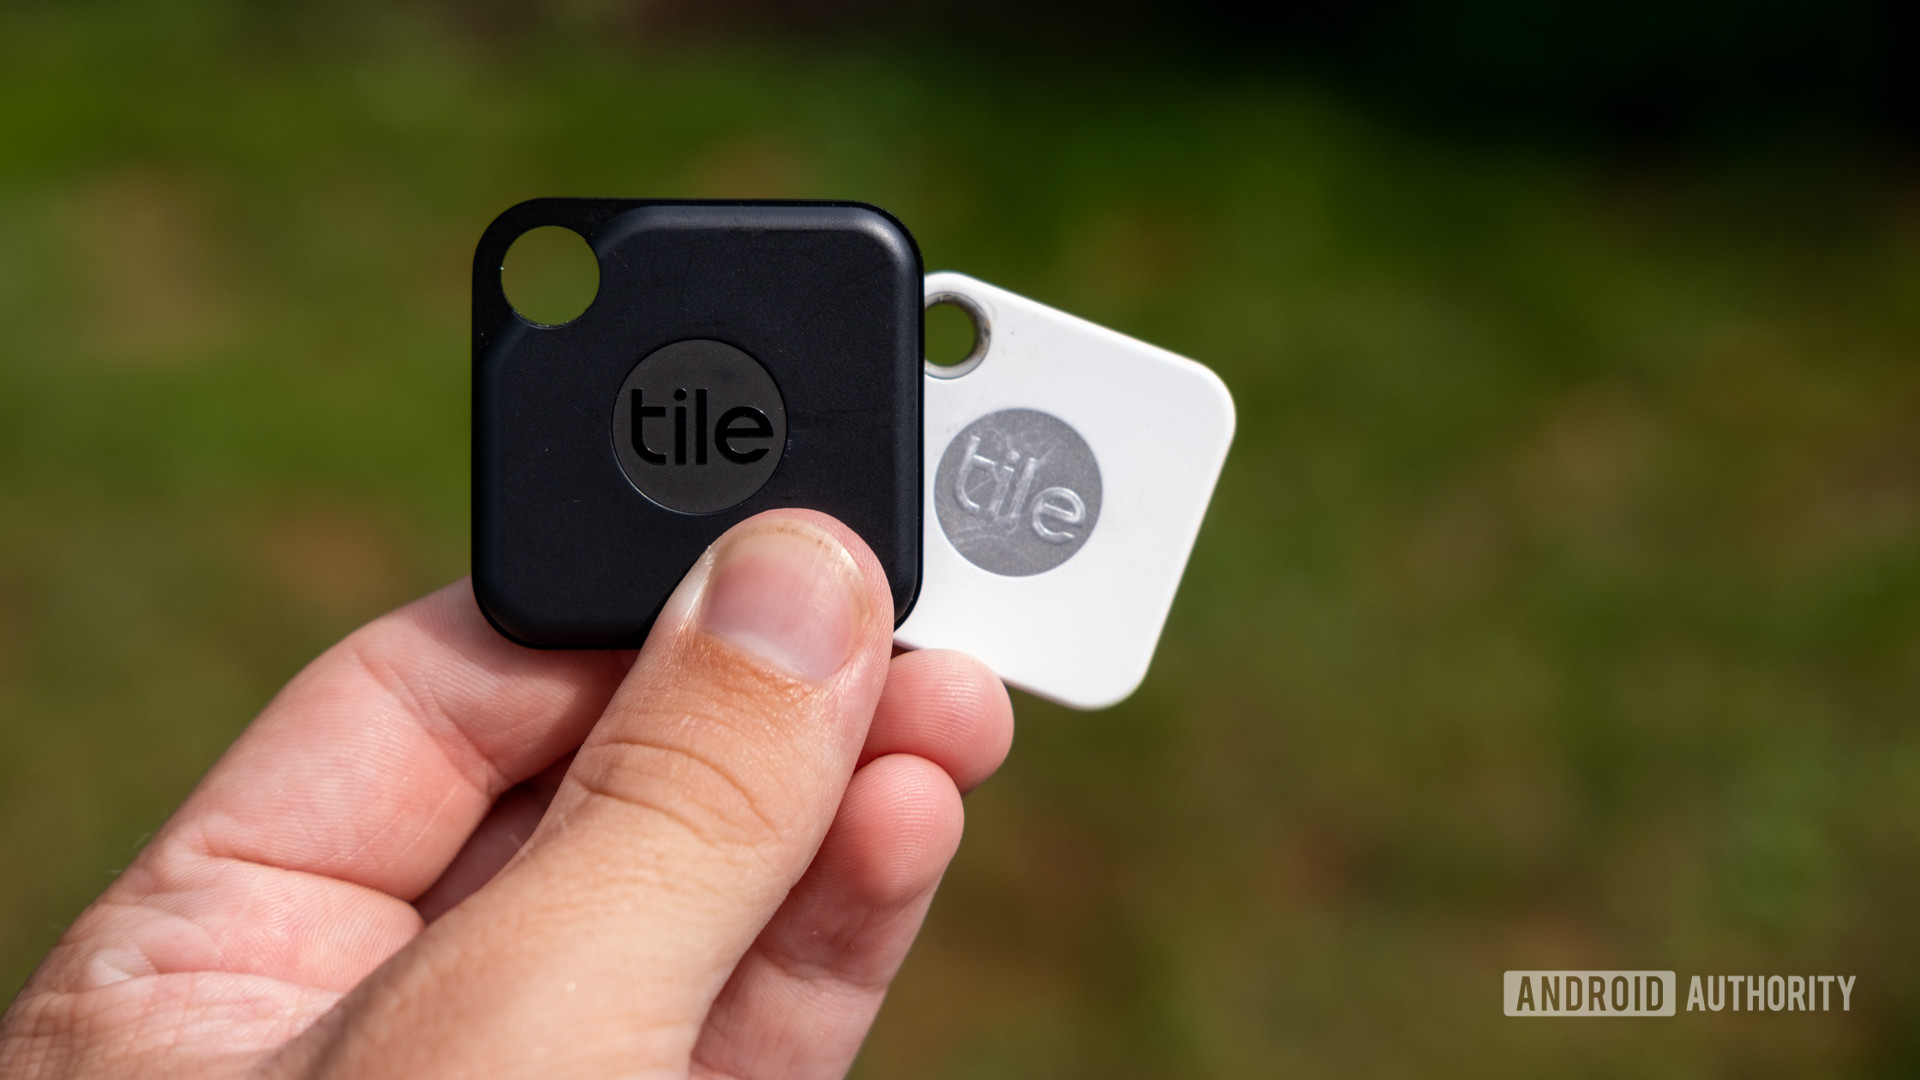 Tile Pro Review The Bluetooth Tracker, The Tile Review